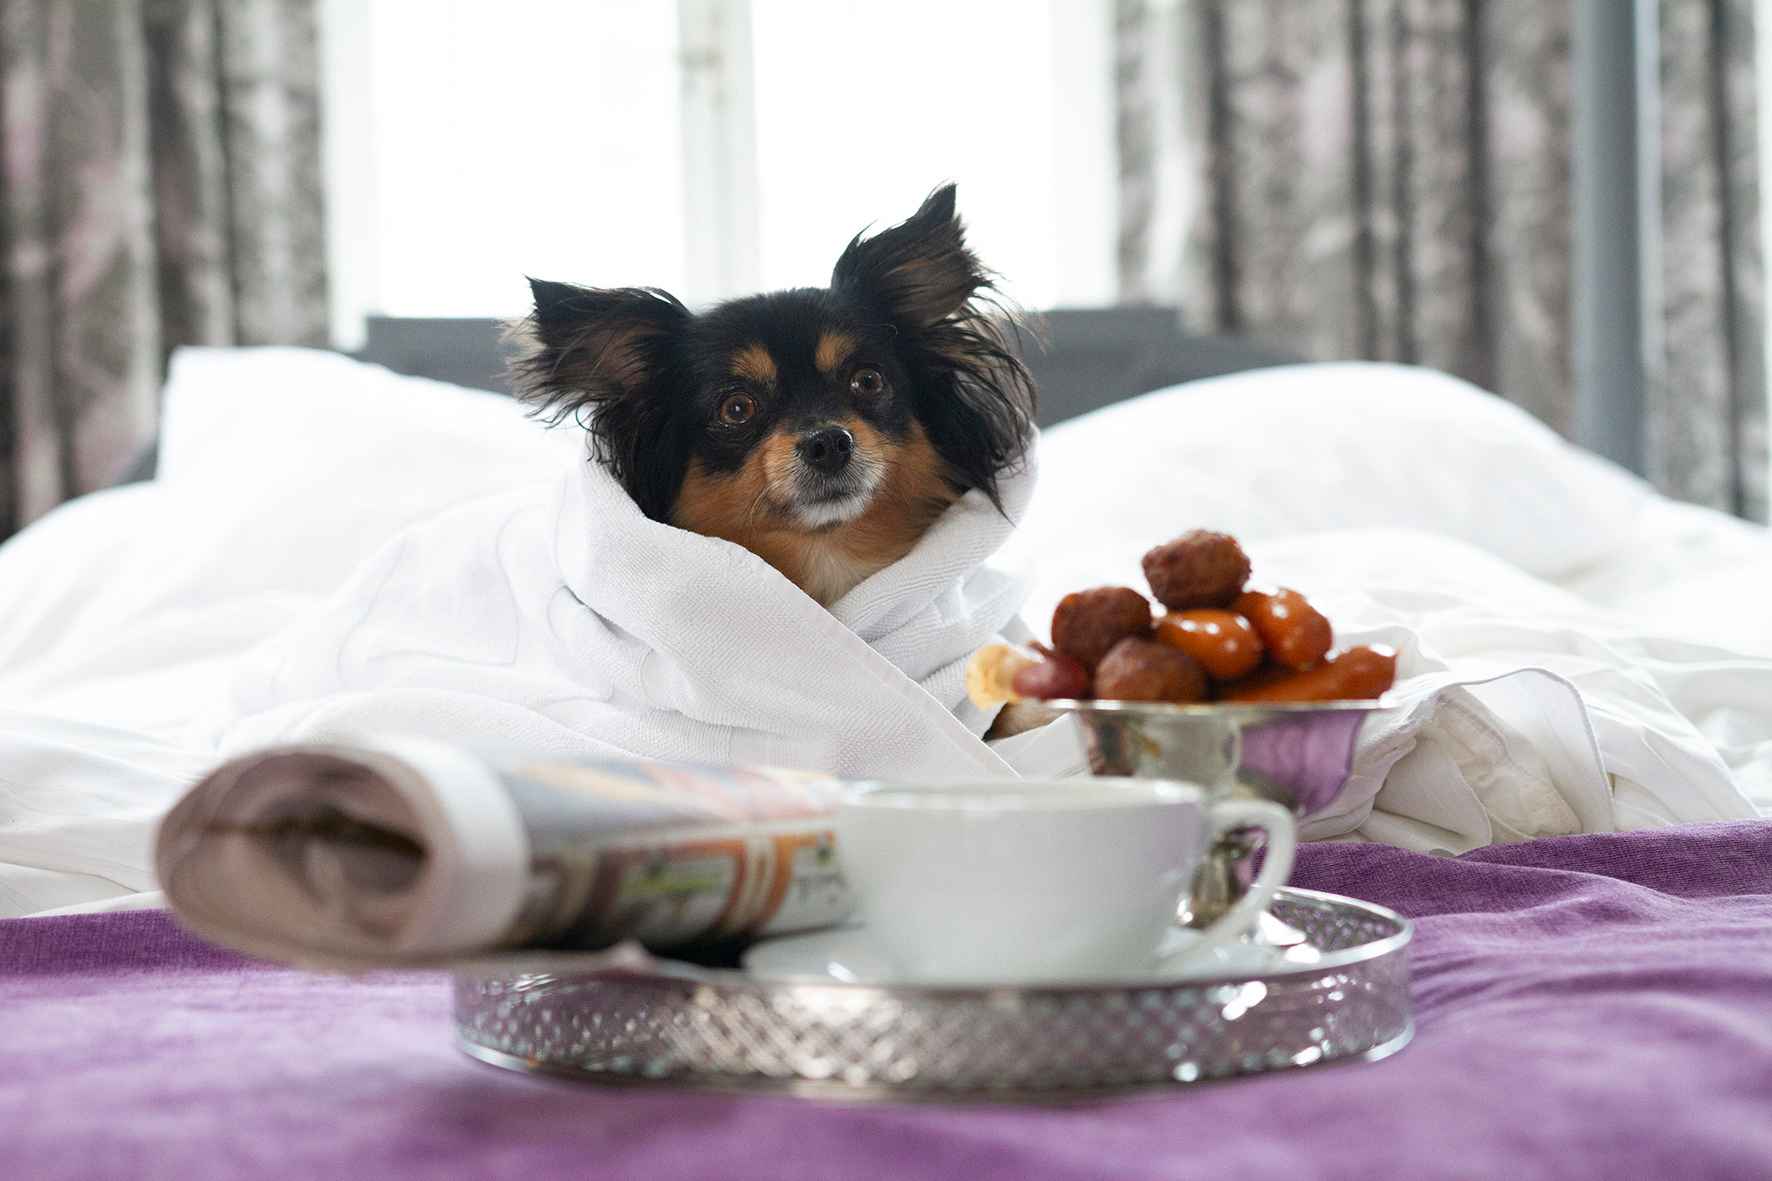 A small dog is wrapped comfortably in bed linen and sits on a hotel bed. In front of the dog are a bowl hos sausages and a tray with a coffee cup and a newspaper.